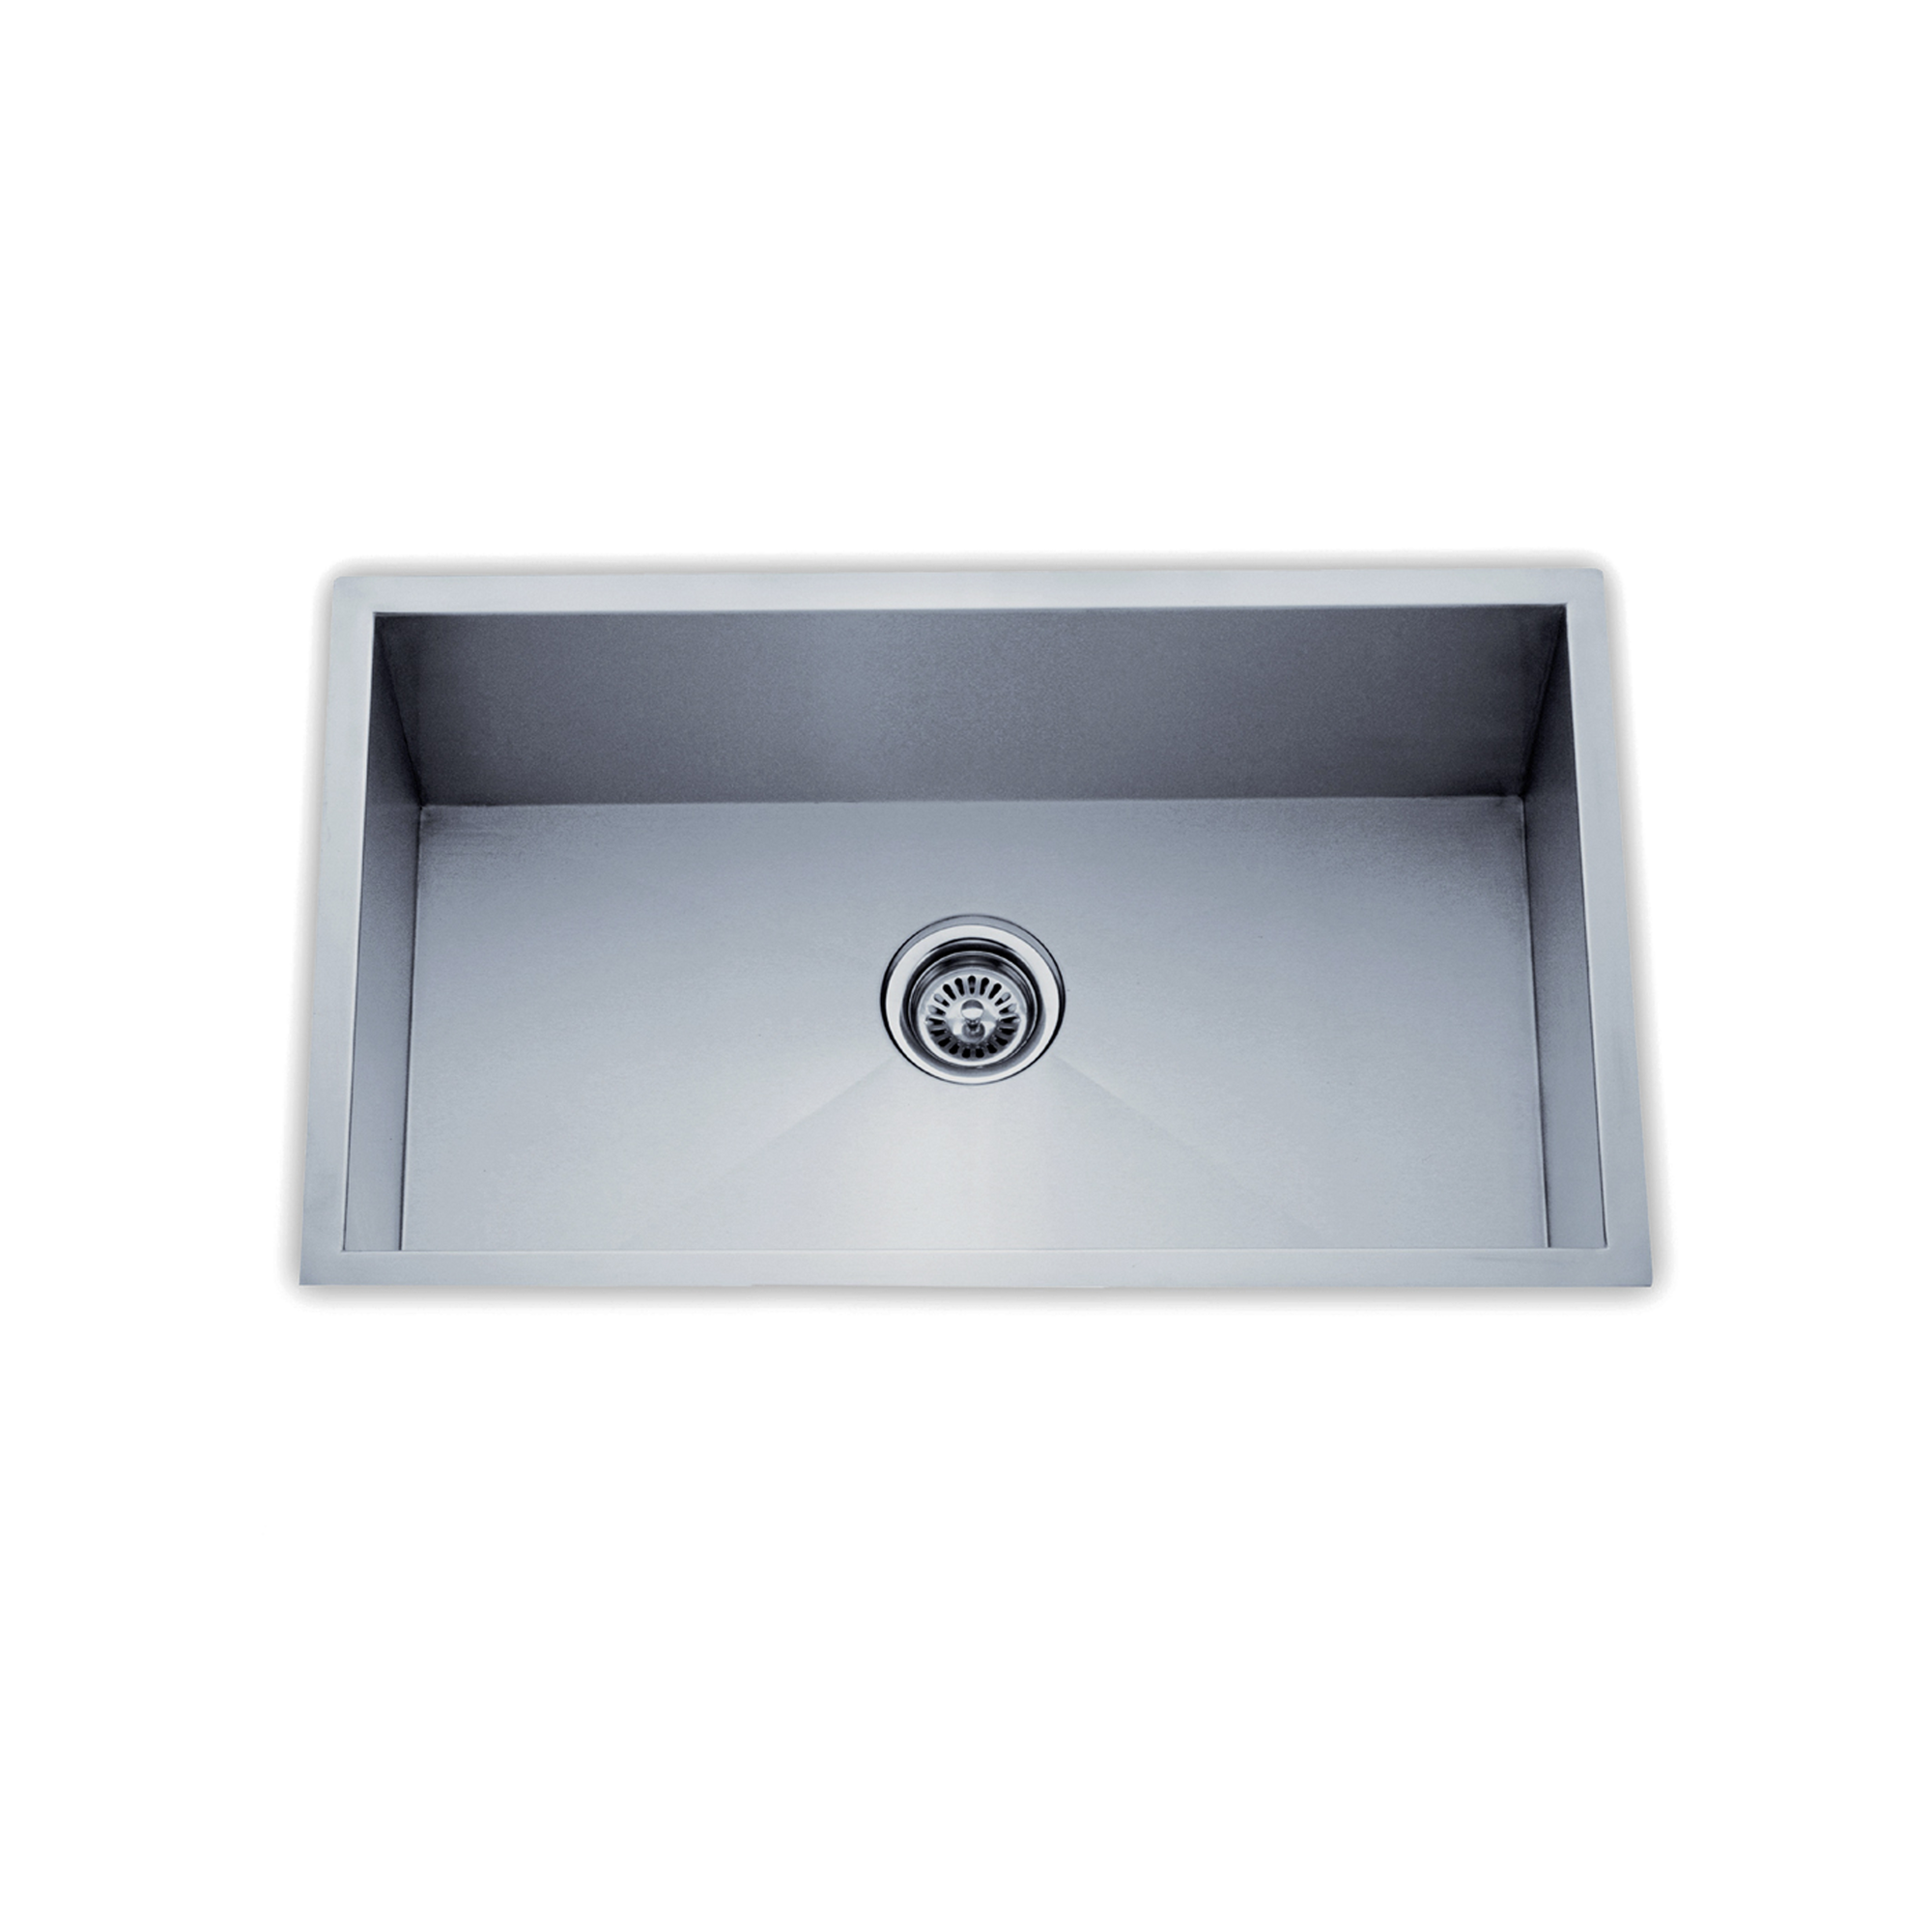 A seamless, contemporary, stainless steel single kitchen sink for under mount application.